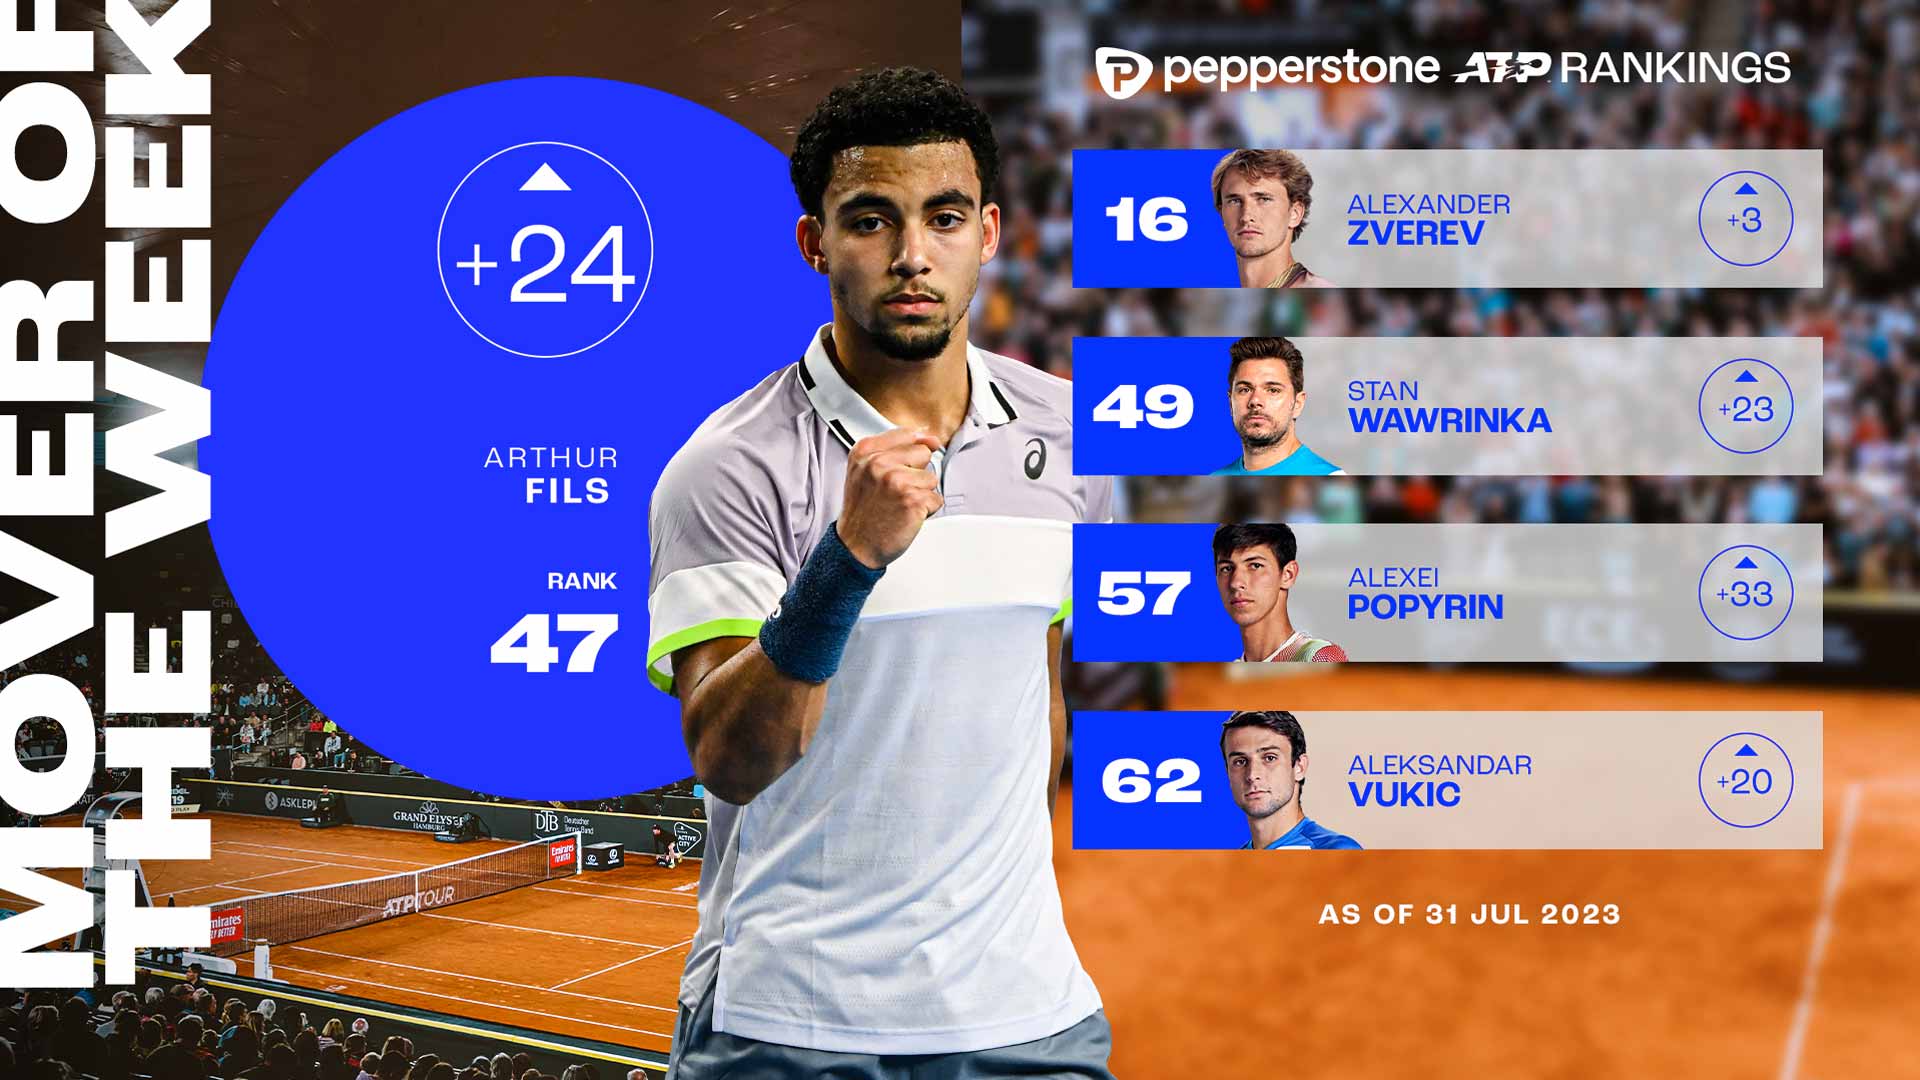 ATP LIVE RANKING. Sonego at a career high after beating Djokovic